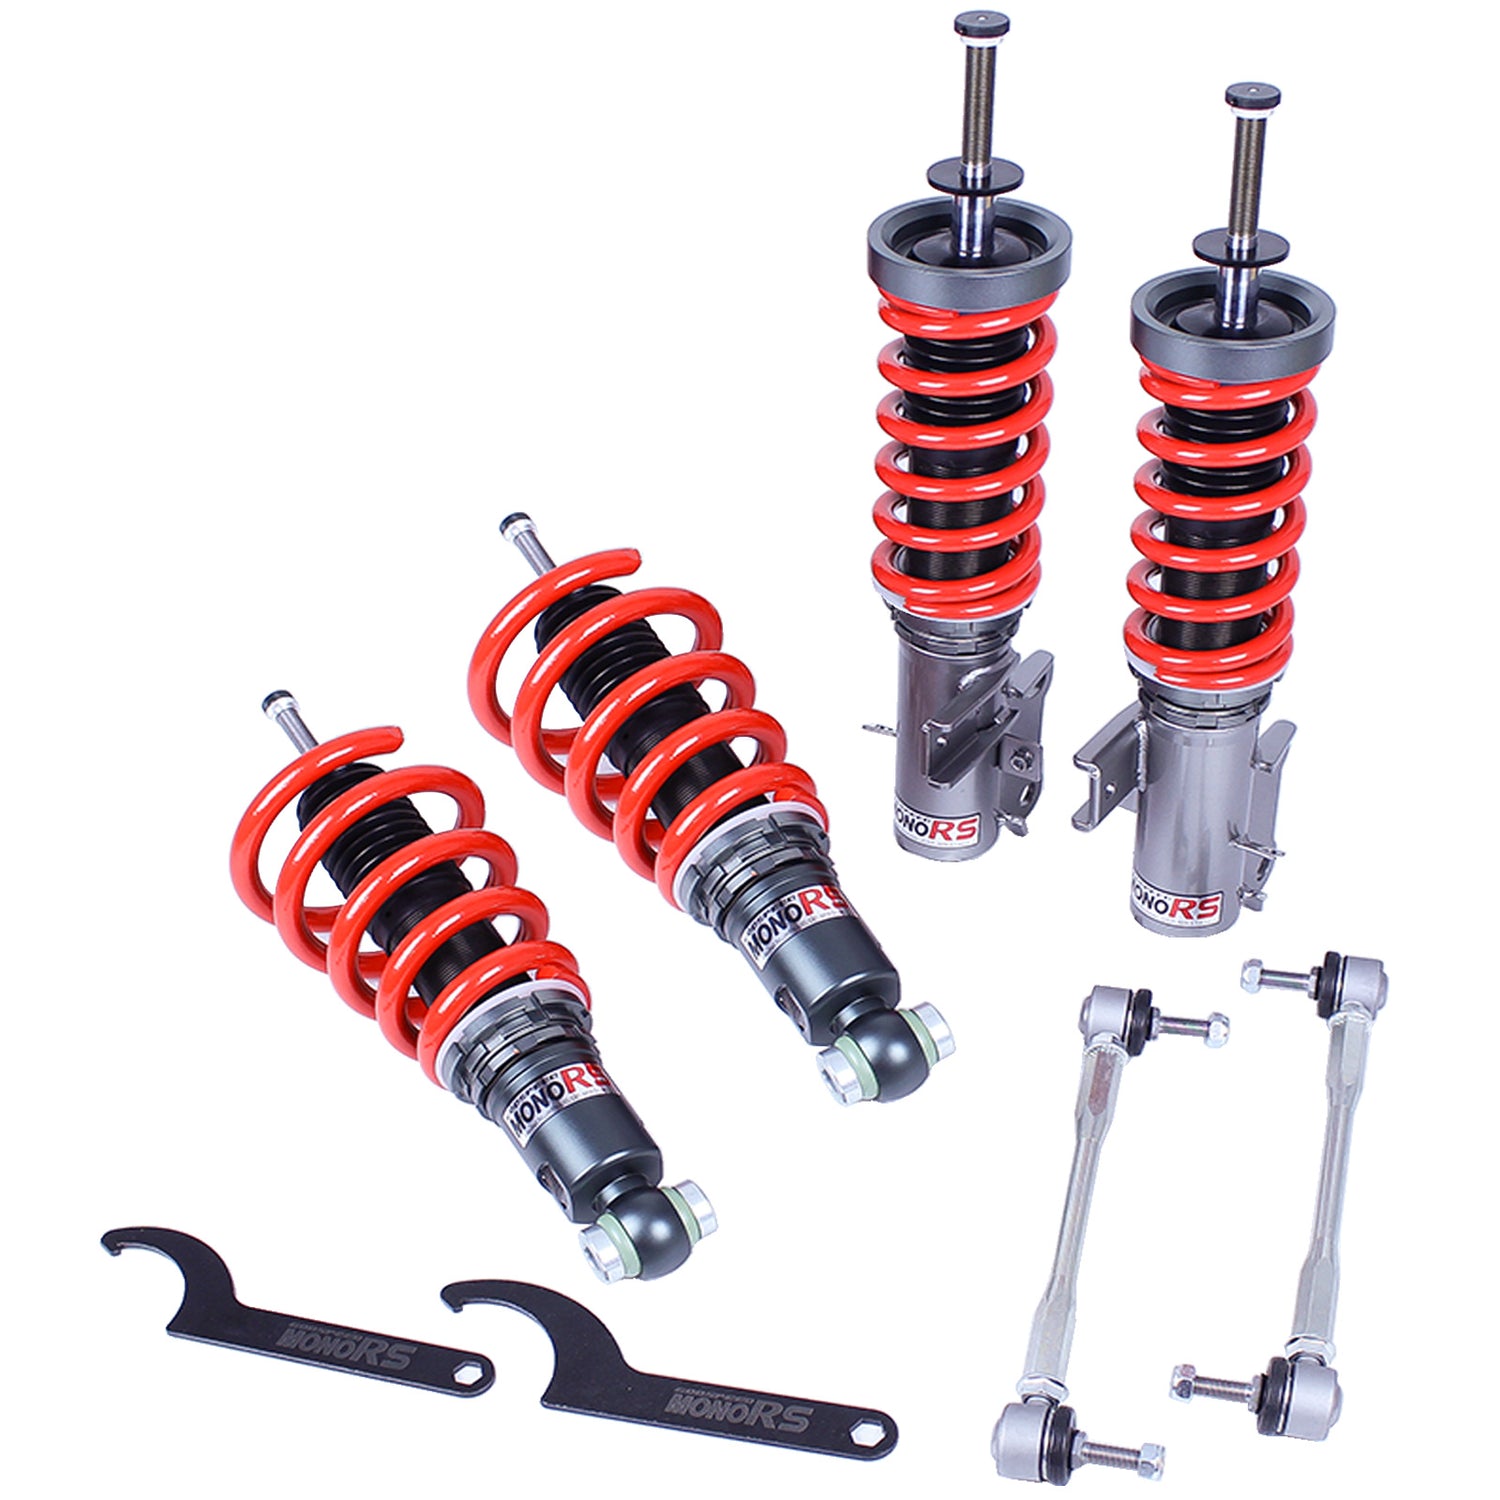 Godspeed MRS1402 MonoRS Coilover Lowering Kit, 32 Damping Adjustment, Ride Height Adjustable